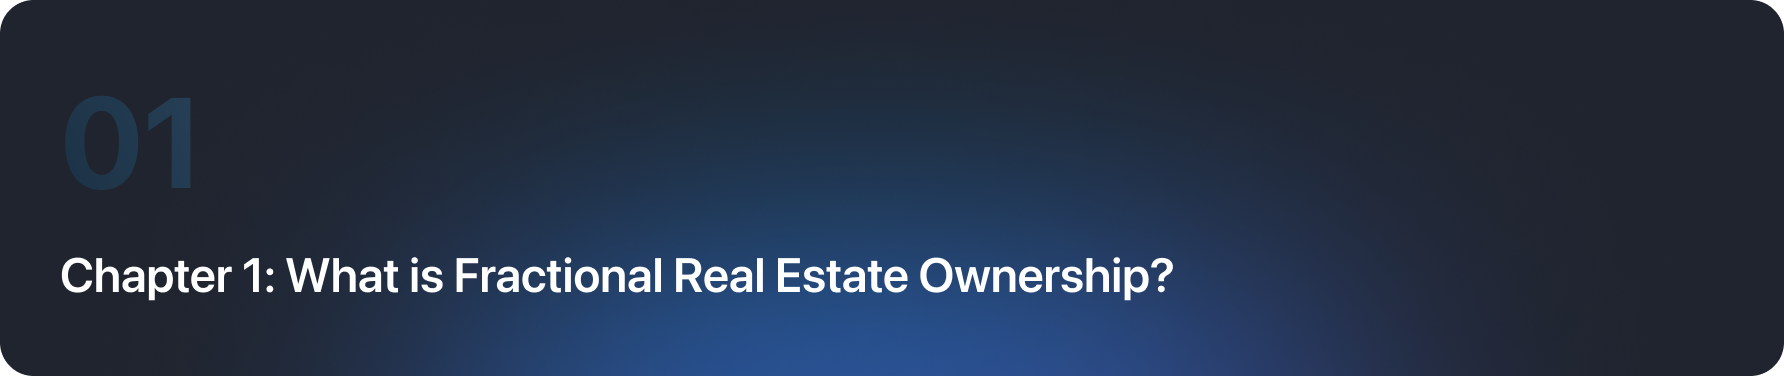 Shared Success: The Comprehensive Guide to Fractional Real Estate Ownership